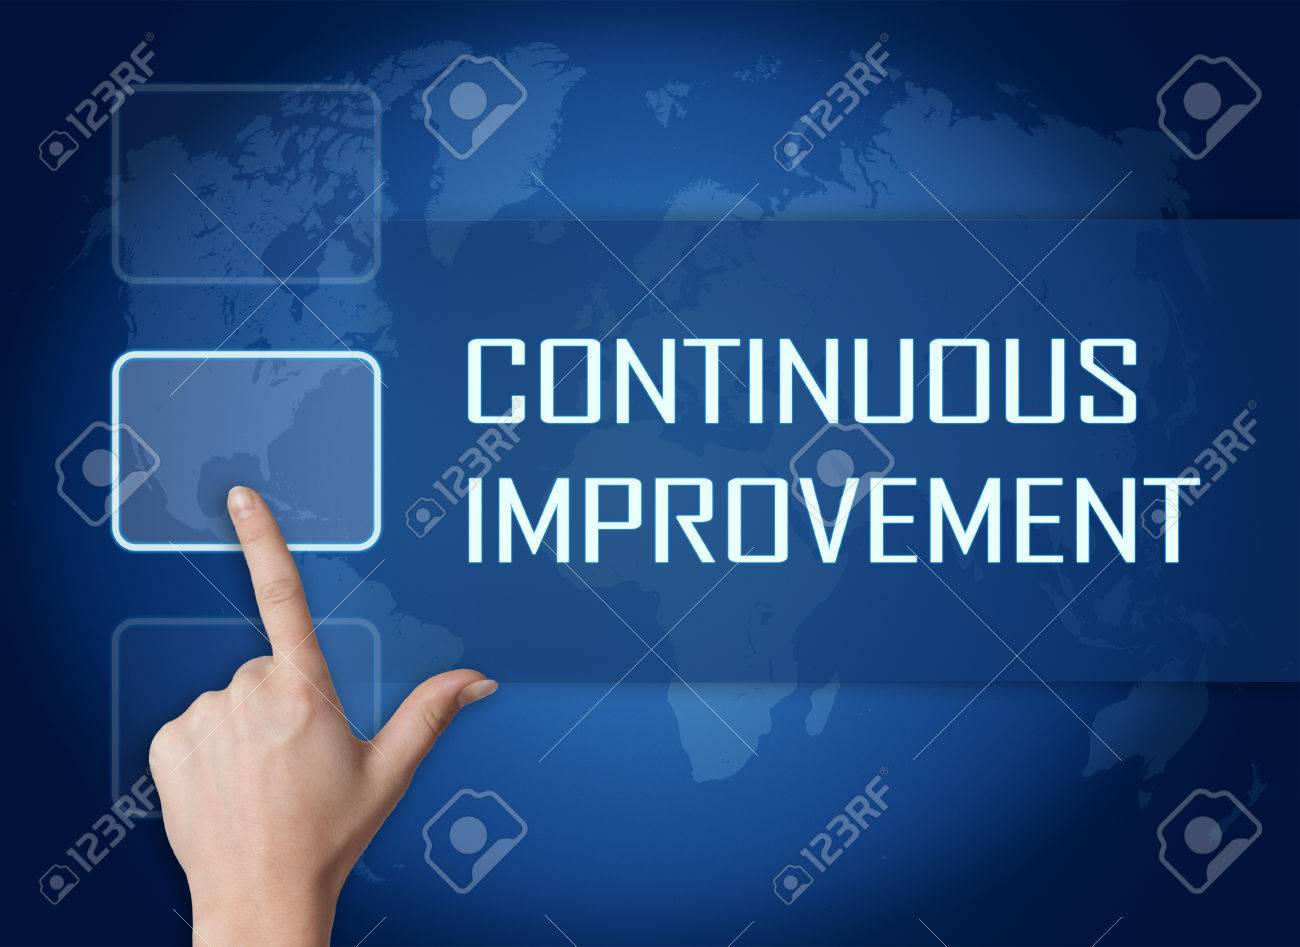 Continuous Improvement Concept With Interface And World Map On